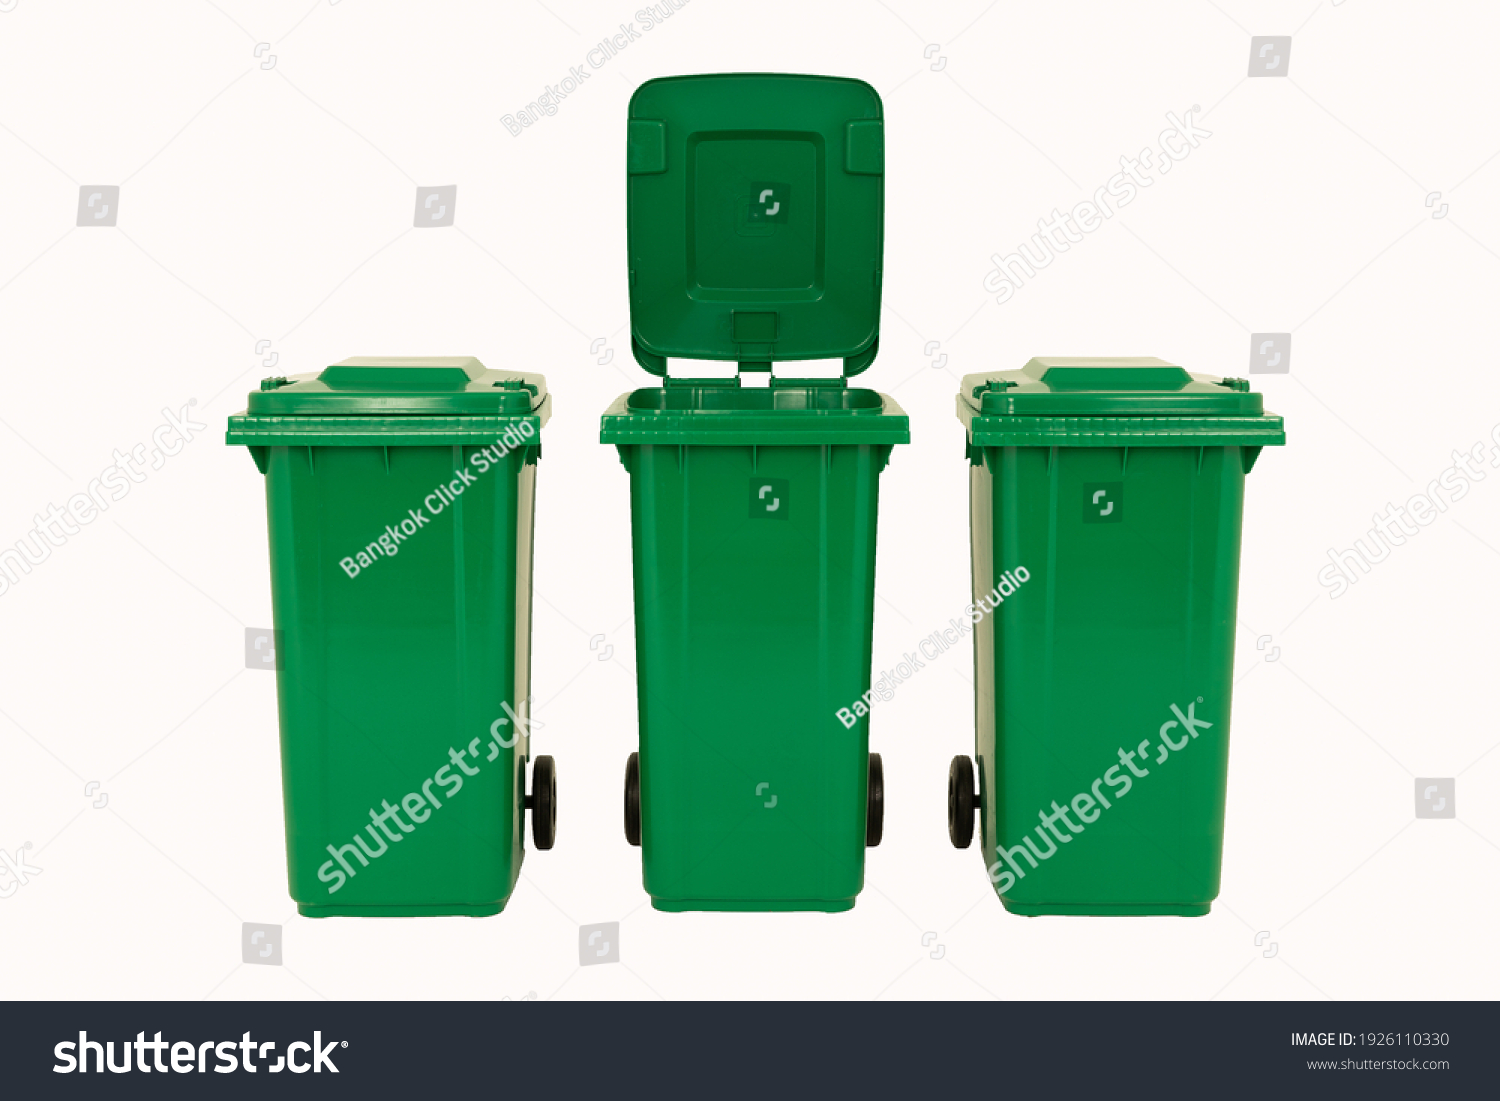 Set of three new unbox green large bins isolated on white background. #1926110330